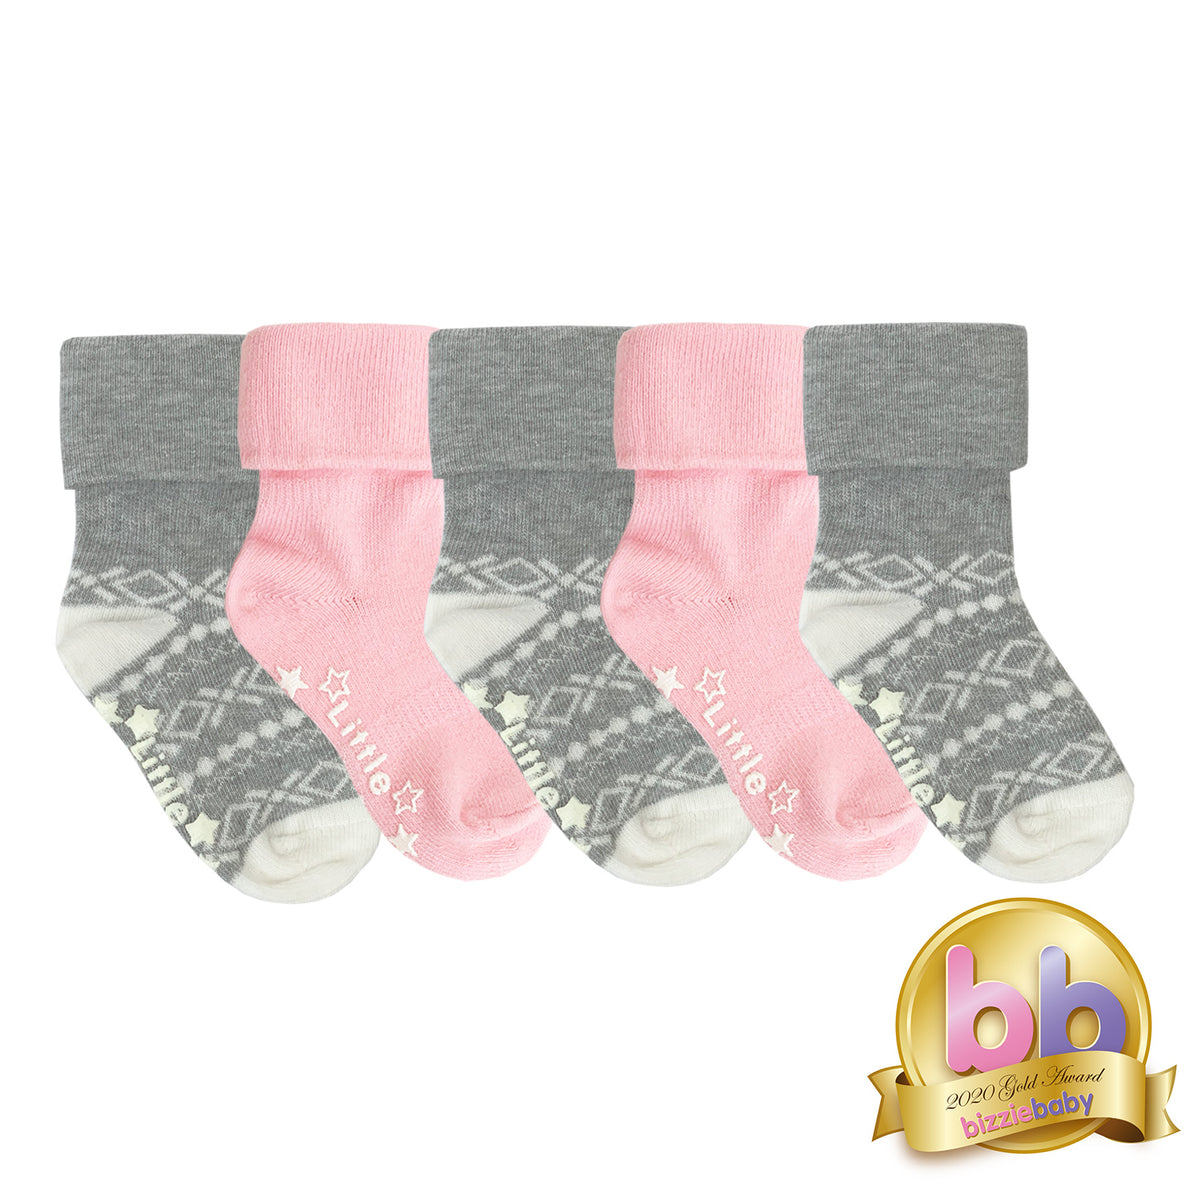 Non-Slip Stay on Baby and Toddler Socks - 5 Pack in Fairy Tale Pink, Grey and Nordic